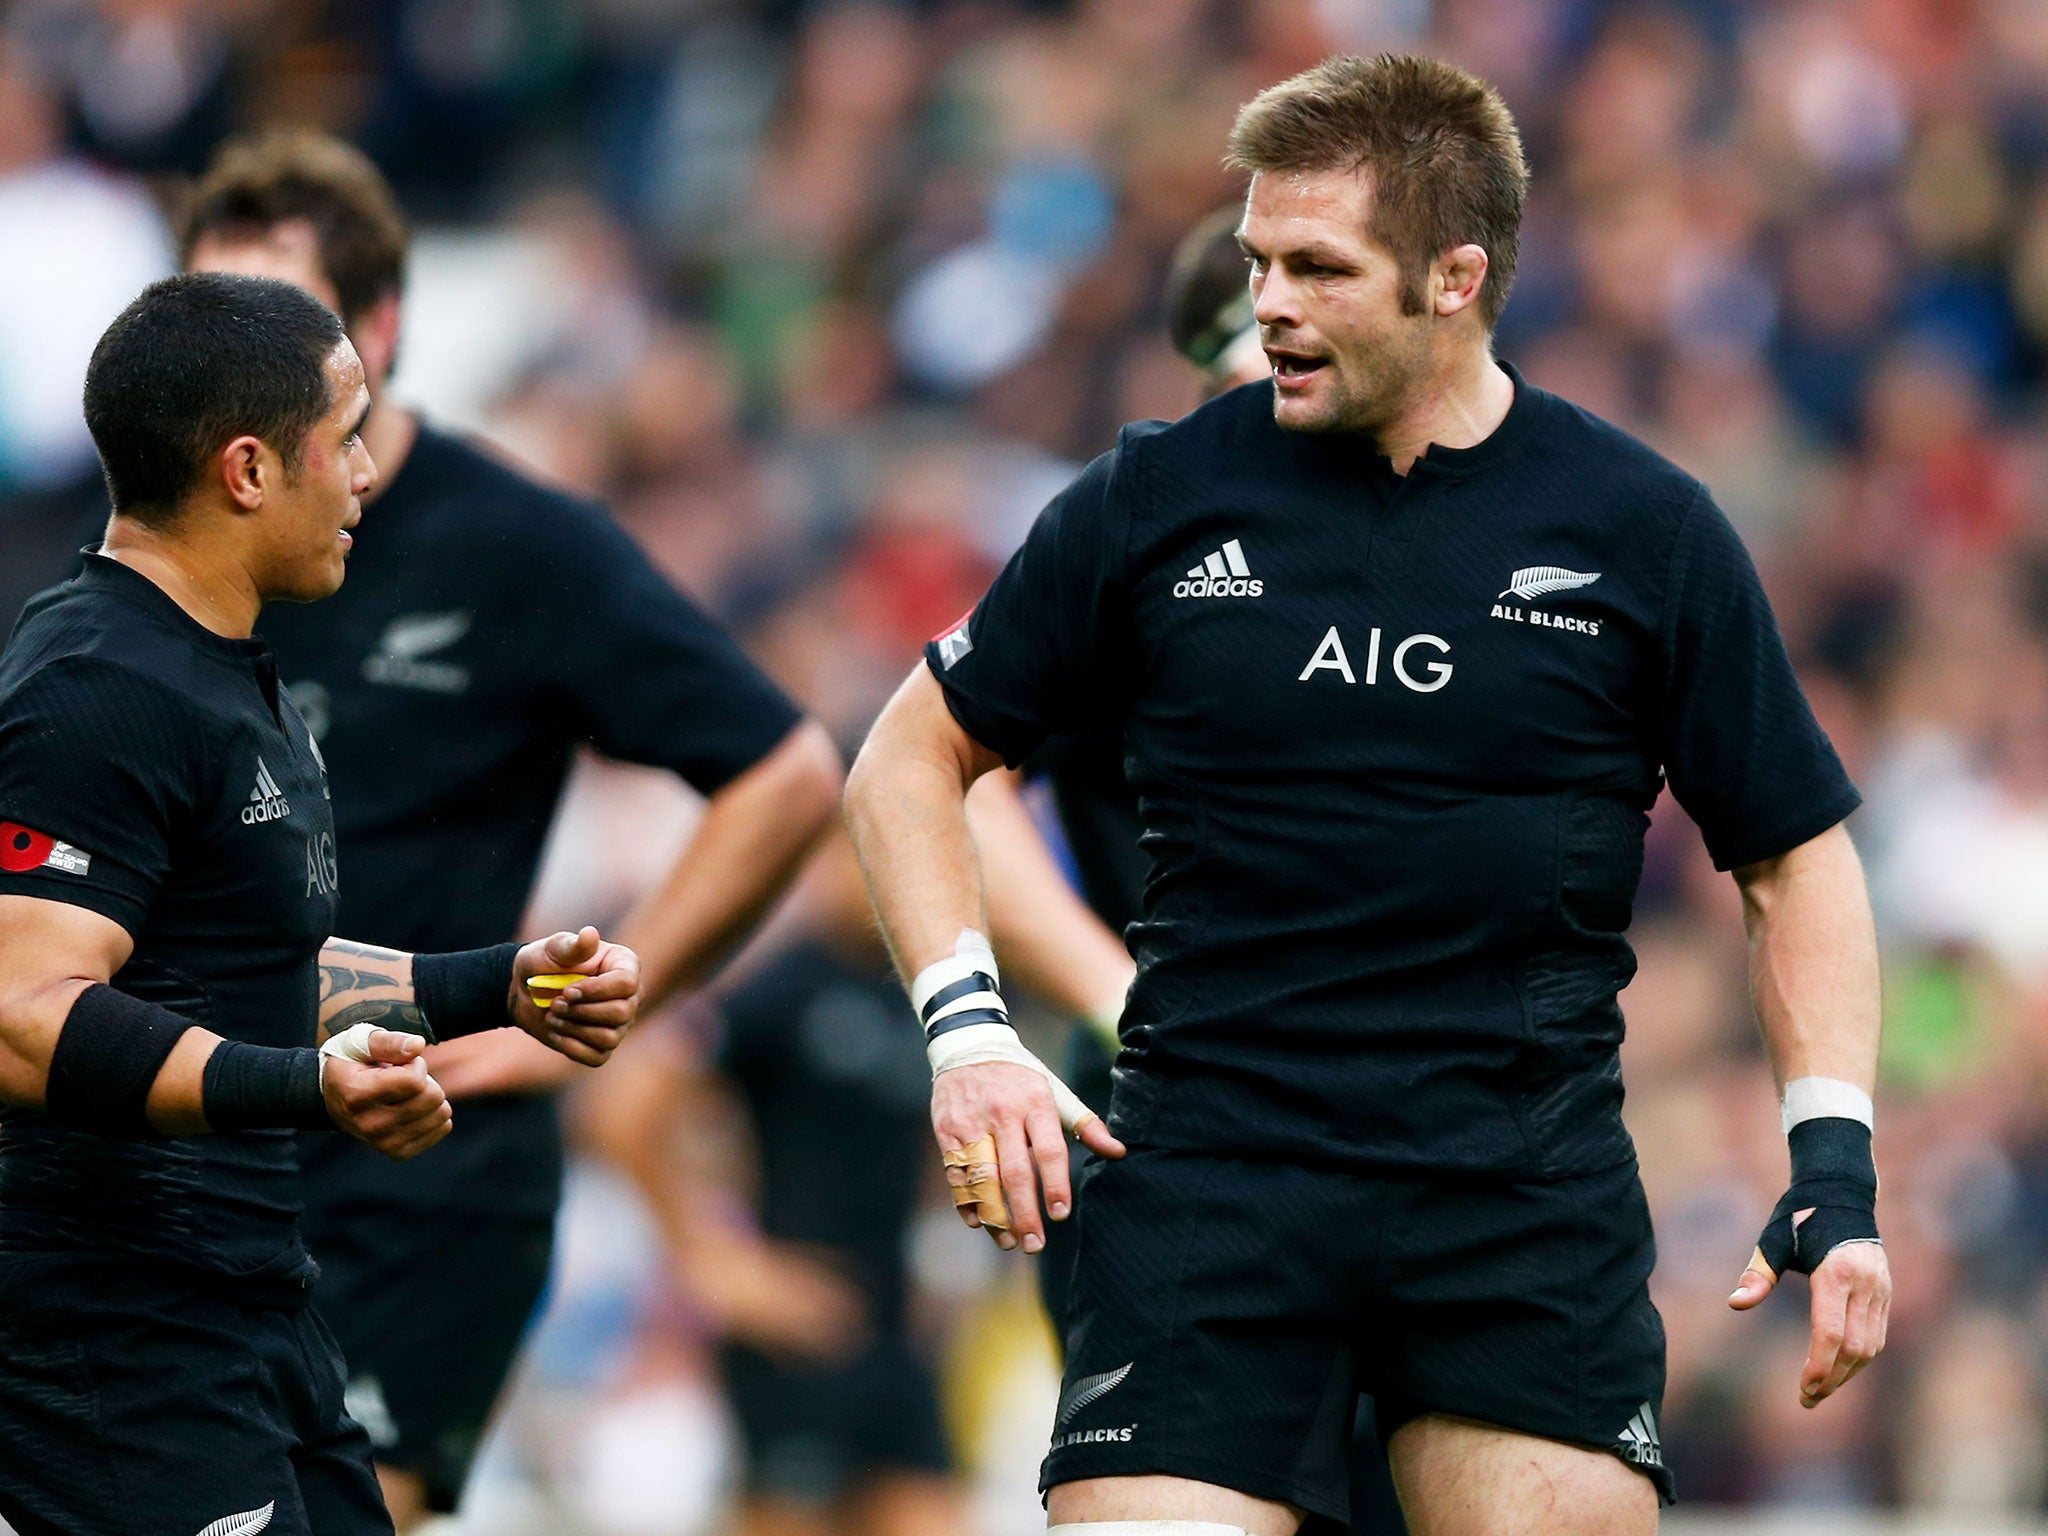 Richie McCaw will captain New Zealand for the 100th time